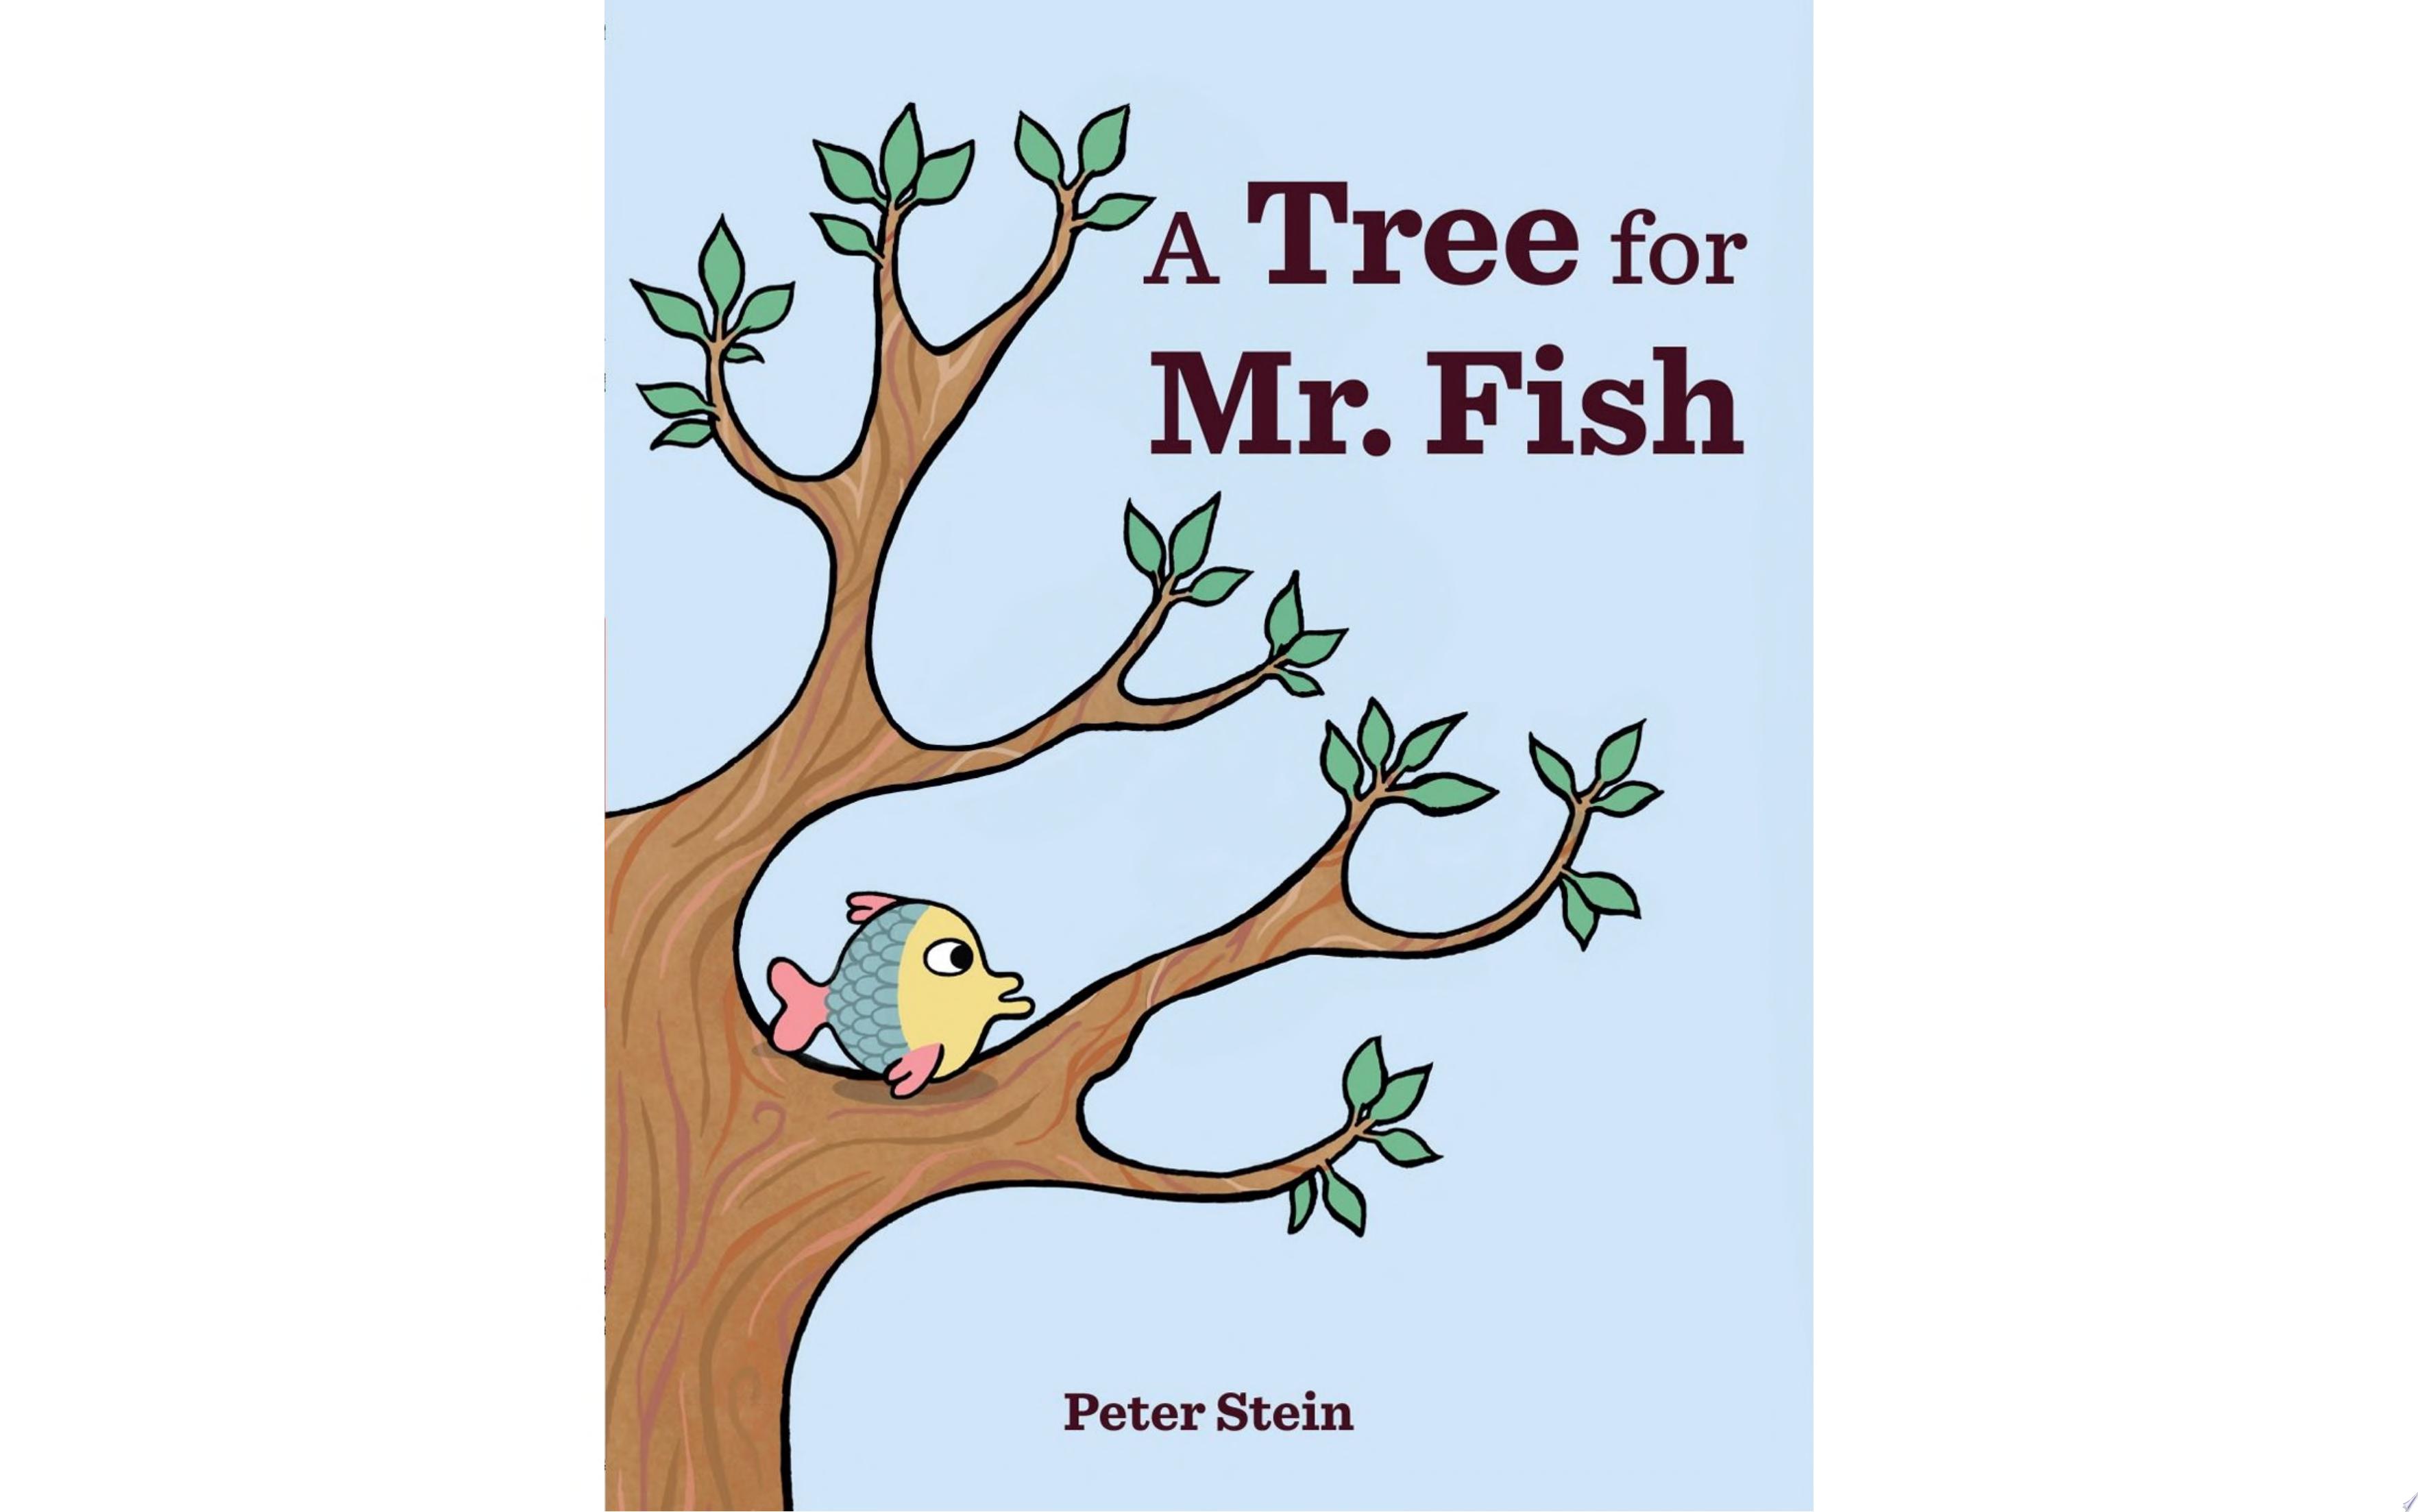 Image for "A Tree for Mr. Fish"